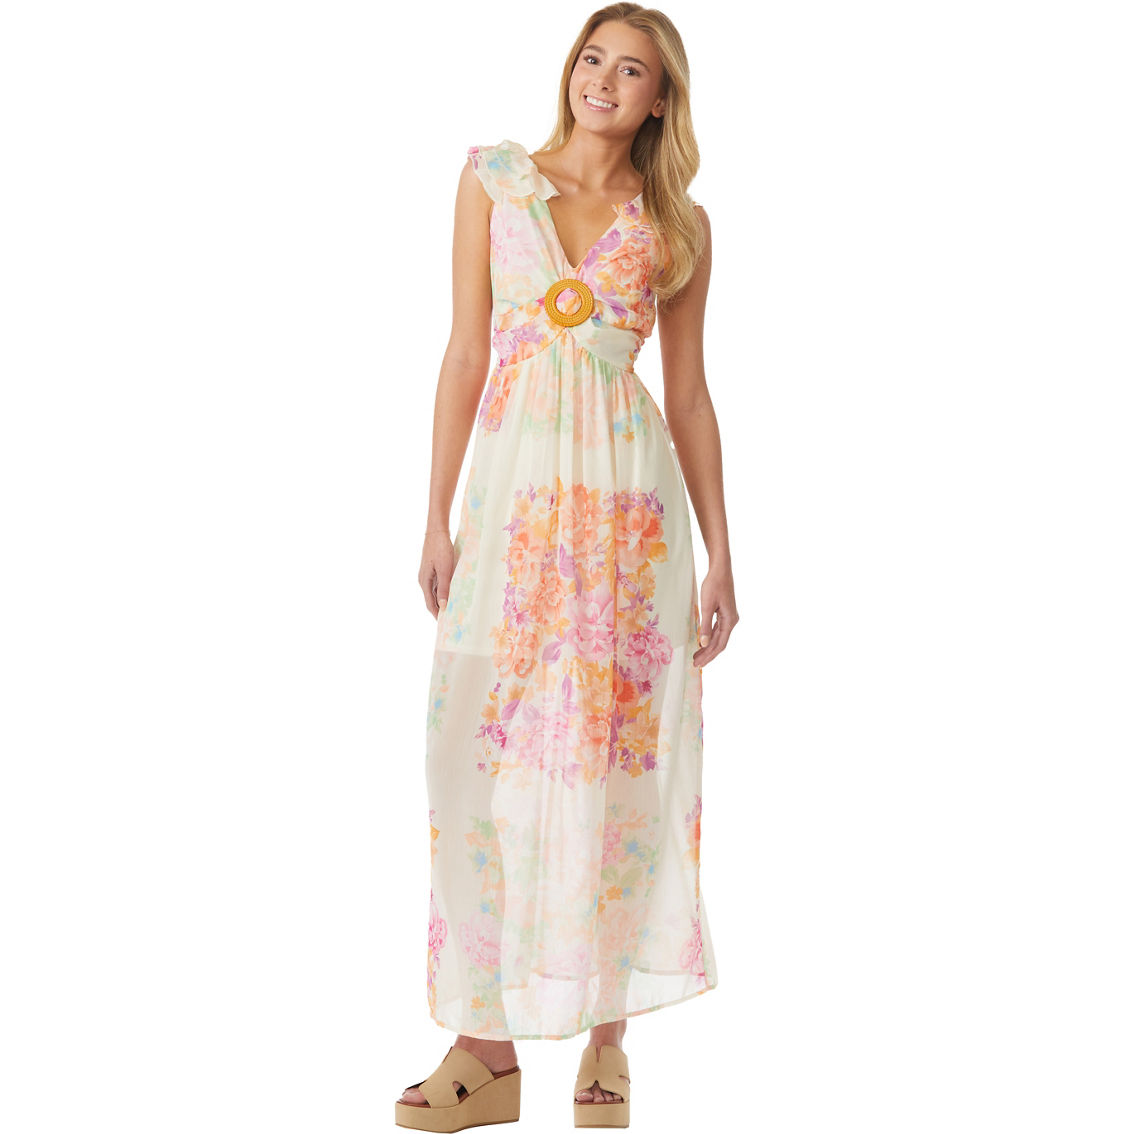 Inspired Hearts Juniors Tiered Sleeve Maxi with Buckle Dress - Image 4 of 4